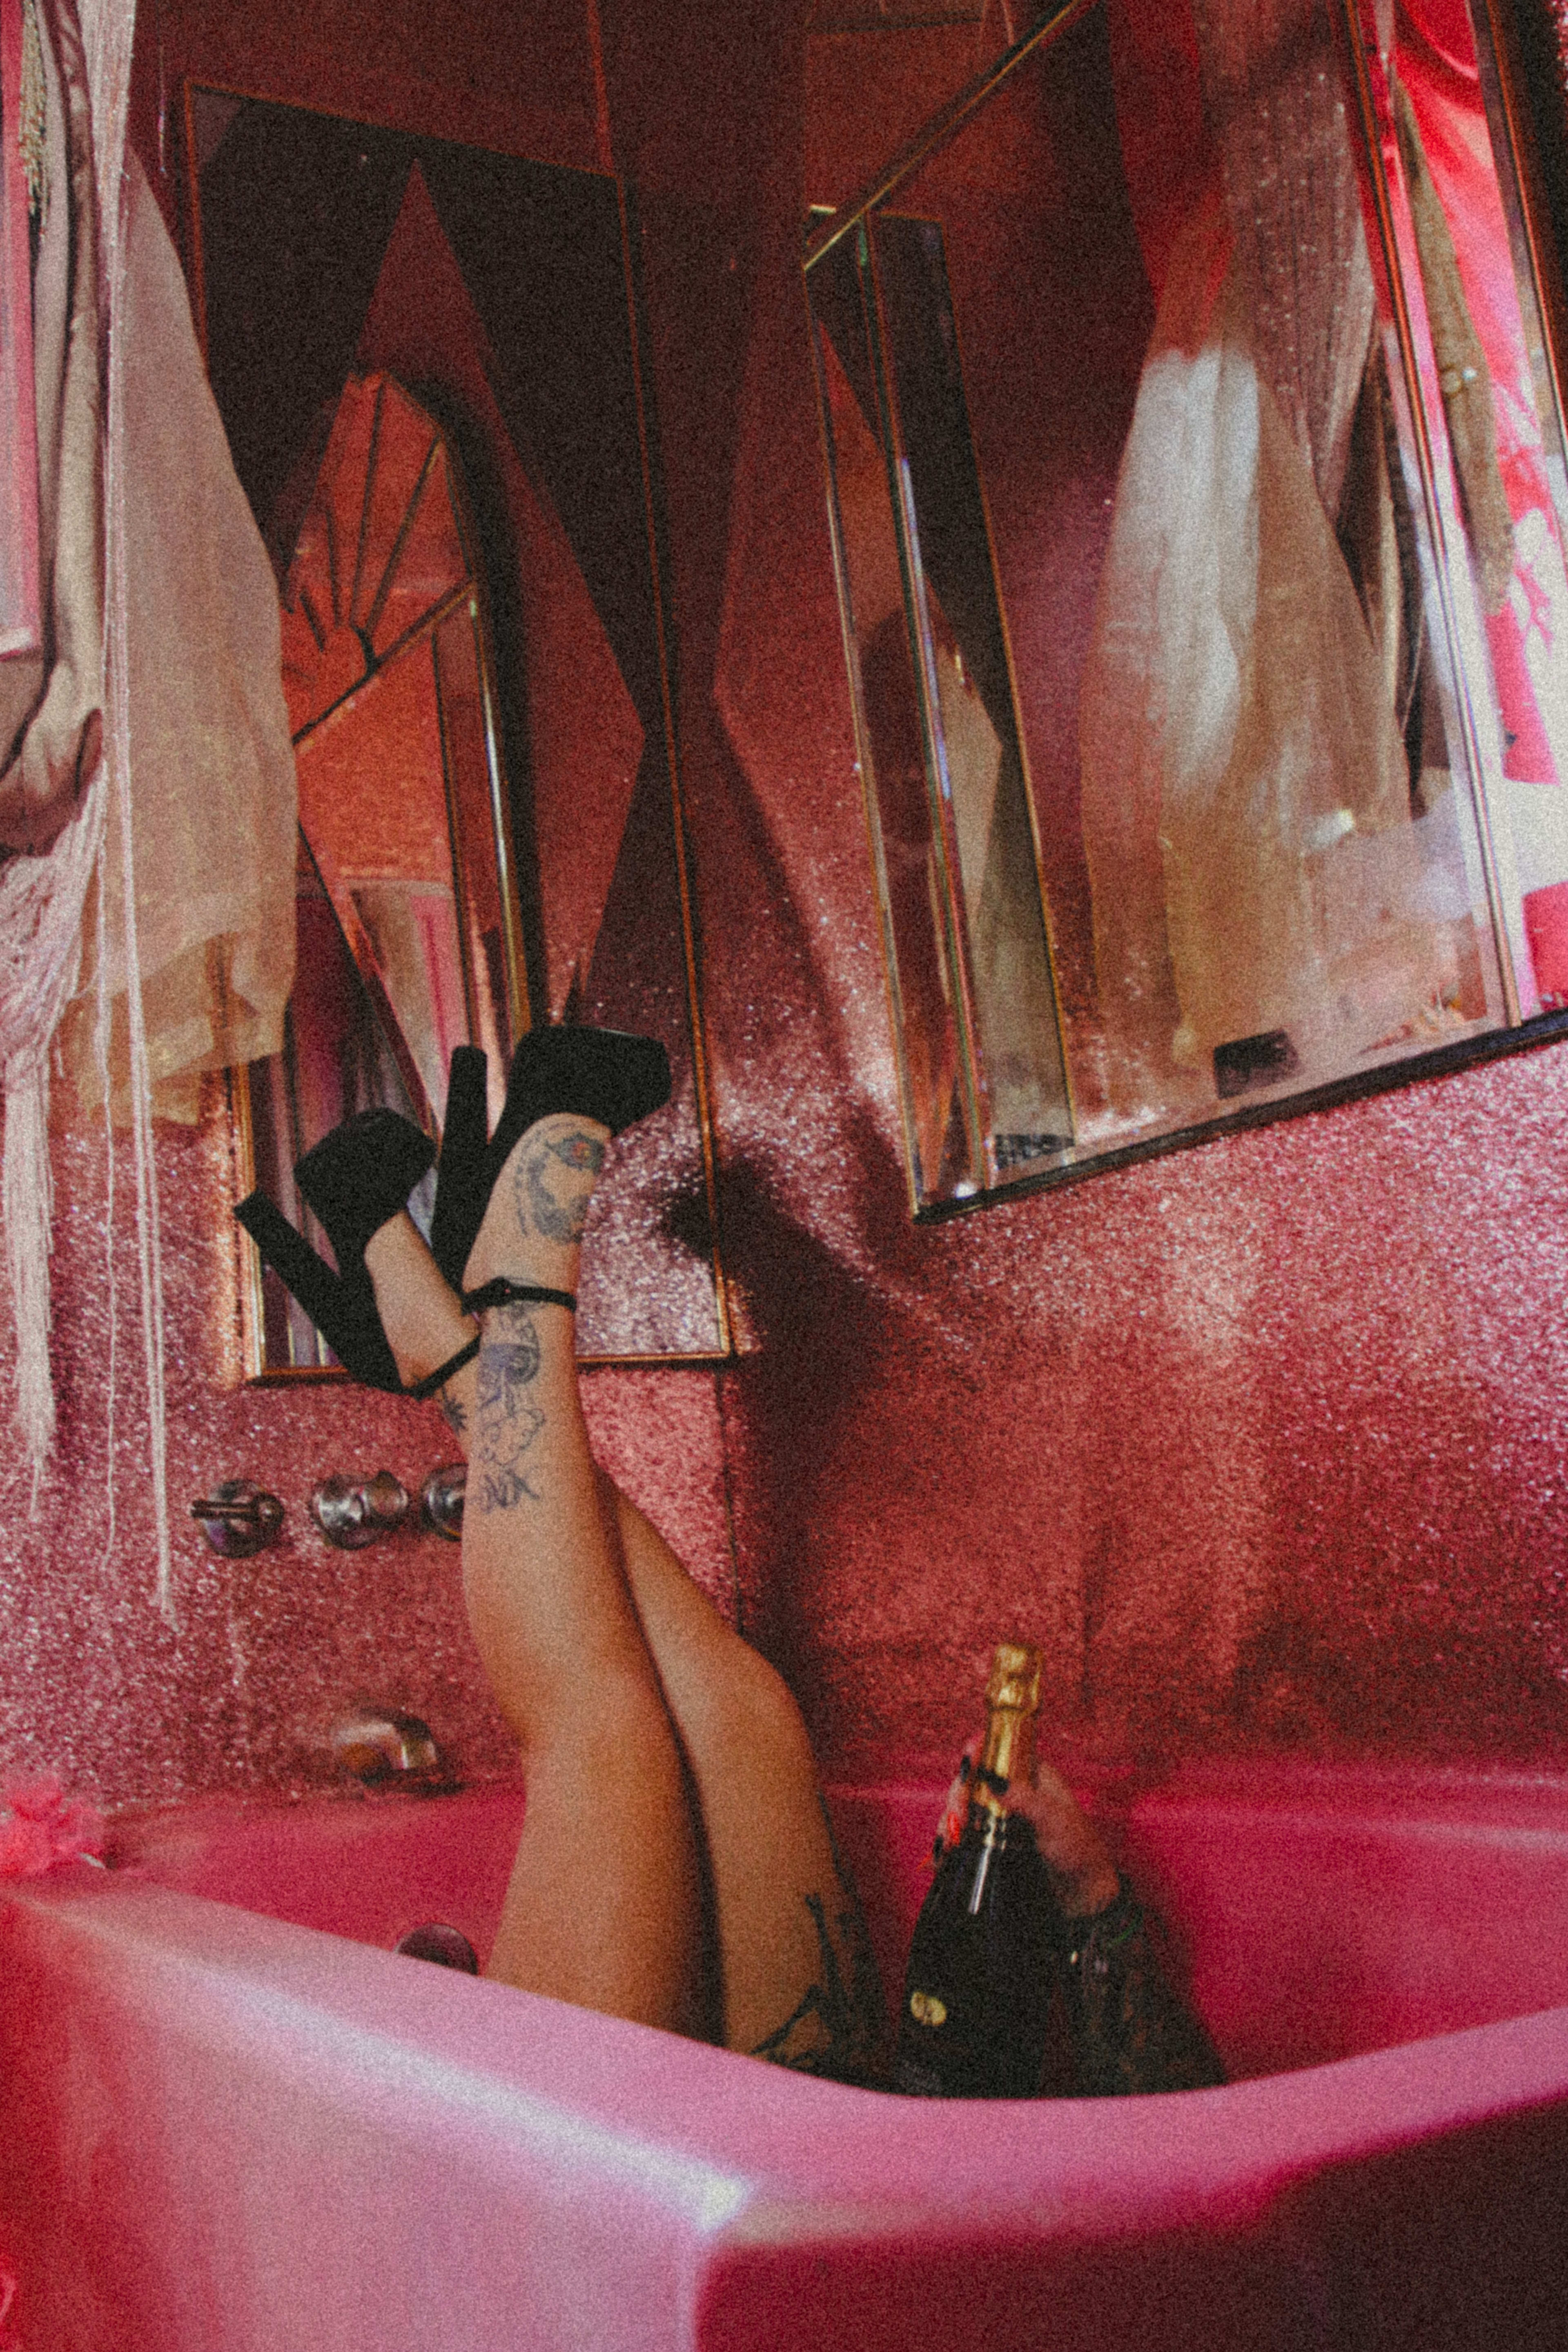 A pink photoshoot of a woman's legs in a bathtub with a bottle of wine.